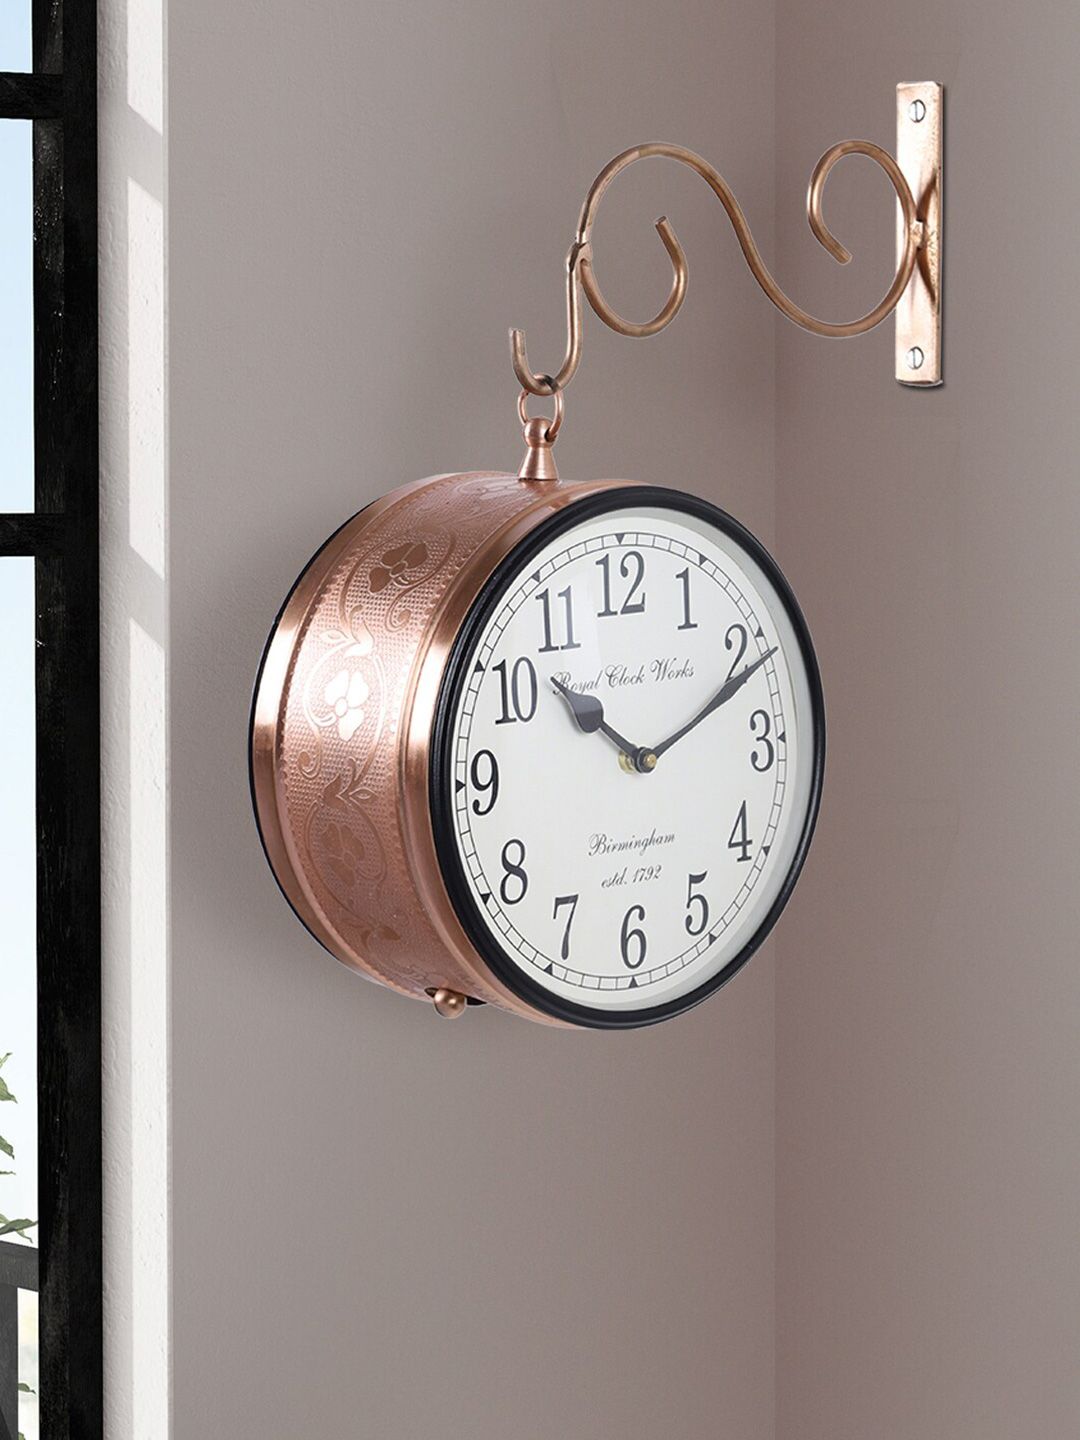 Aapno Rajasthan Pink & White Contemporary Wall Clock Price in India